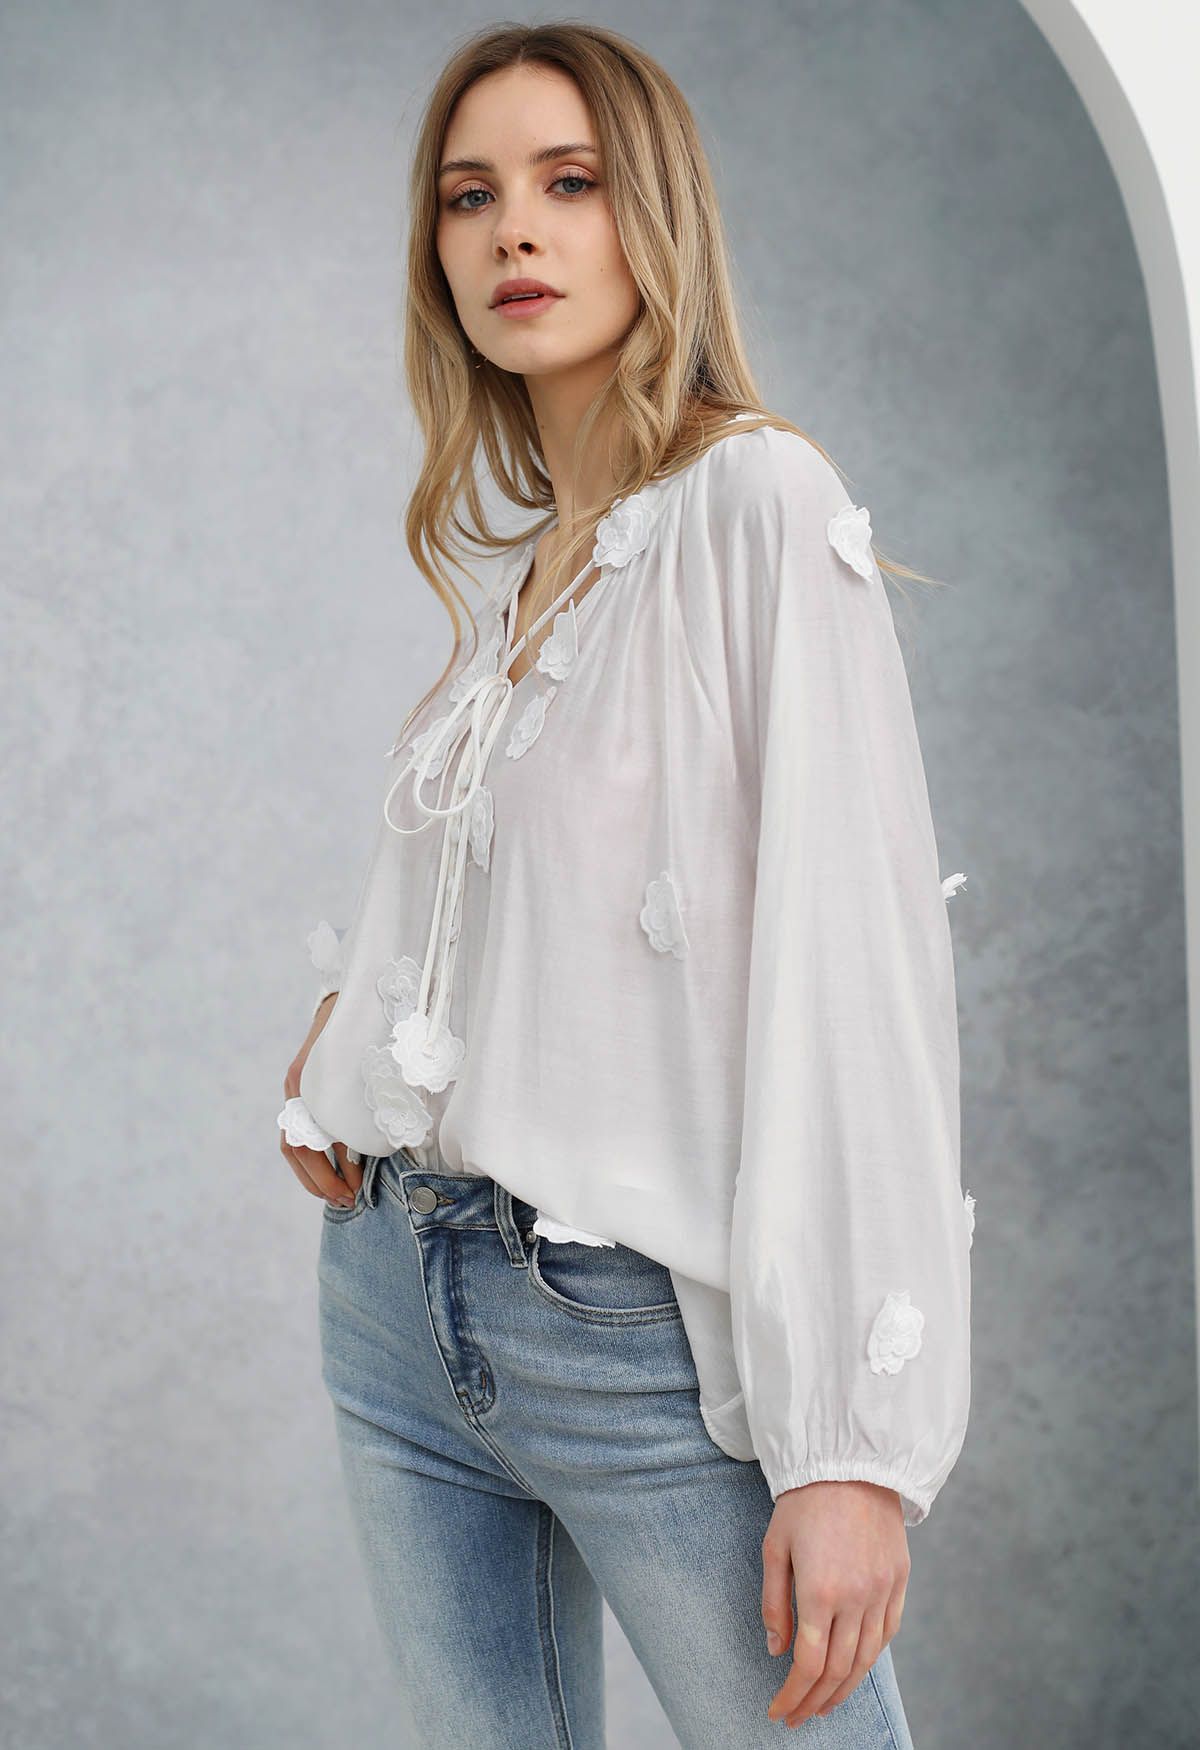 Romantic Blossom 3D Lace Flowers Buttoned Shirt in White